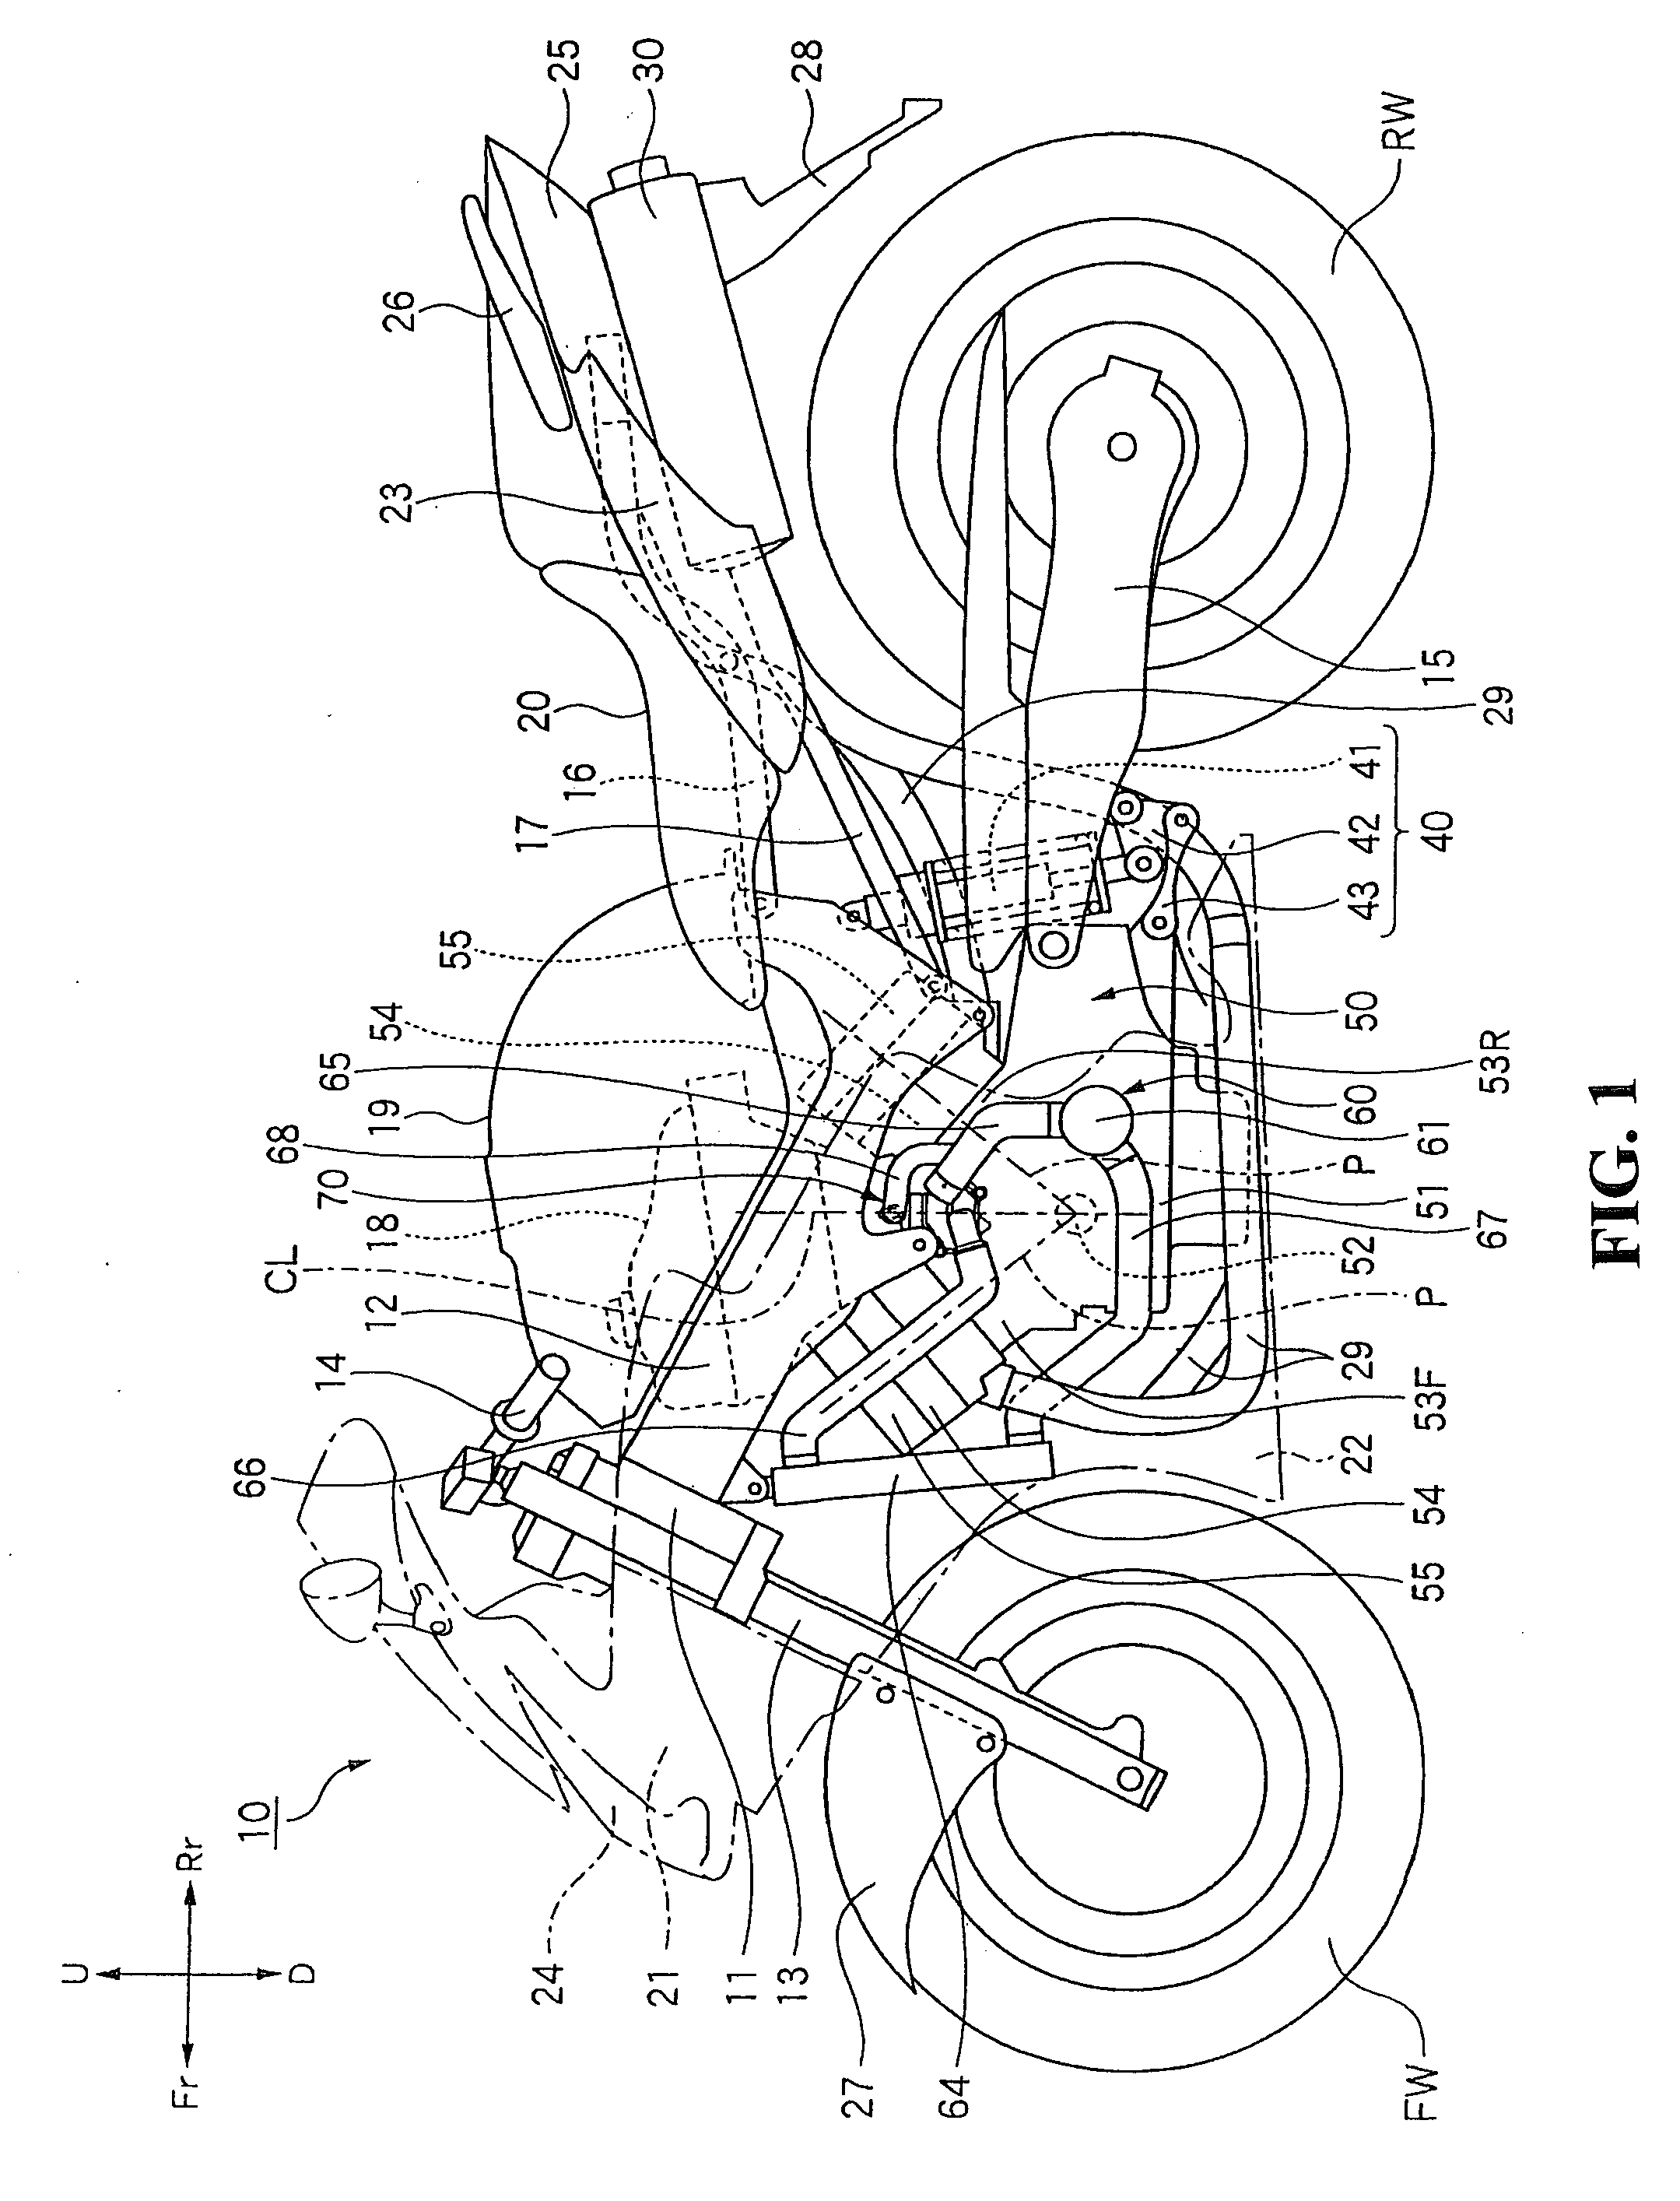 Cooling water passage structure for engine